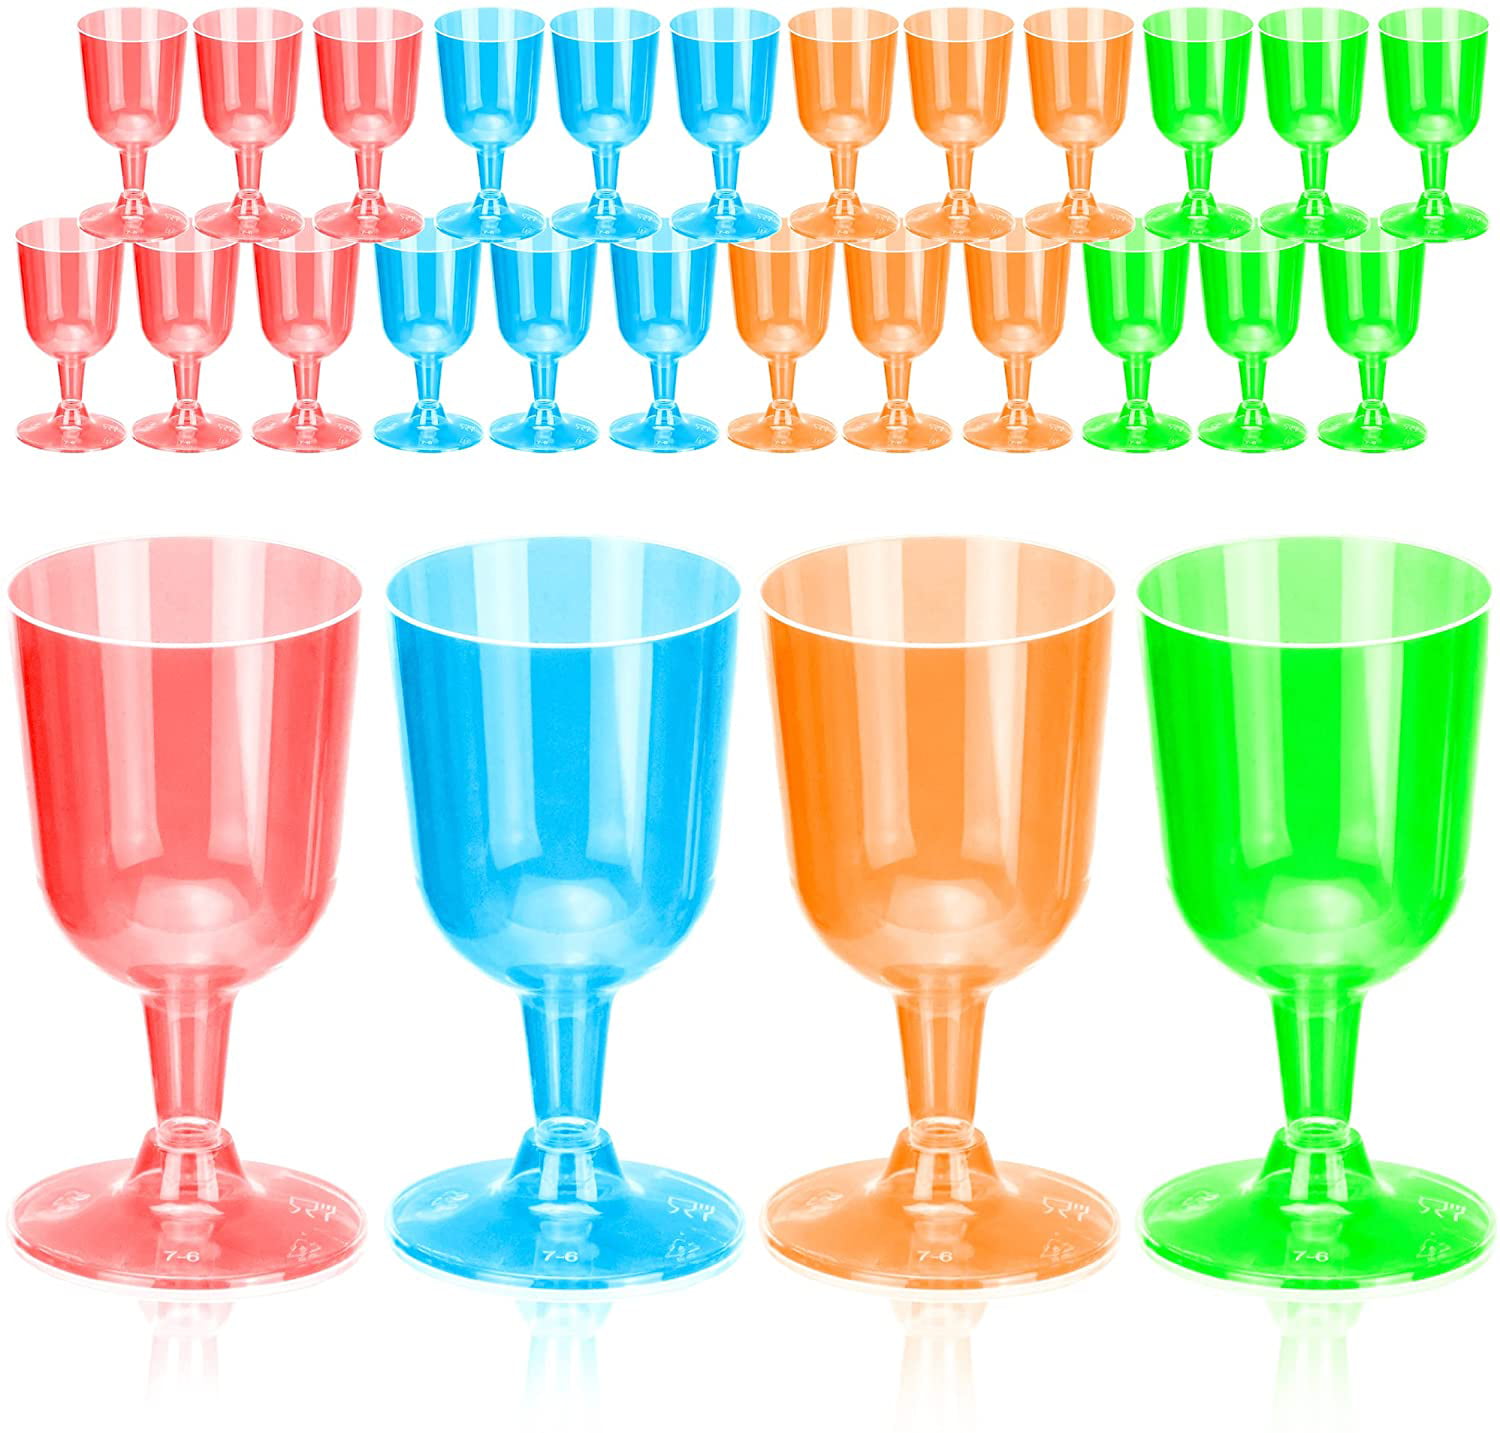 Weddings Plastic Party Champagne Cups Reusable Picnics Stackable Stemmed Disposable Wine Glasses Perfect for Outdoor Parties DecorRack 12 Cocktail Glasses Pack of 12 